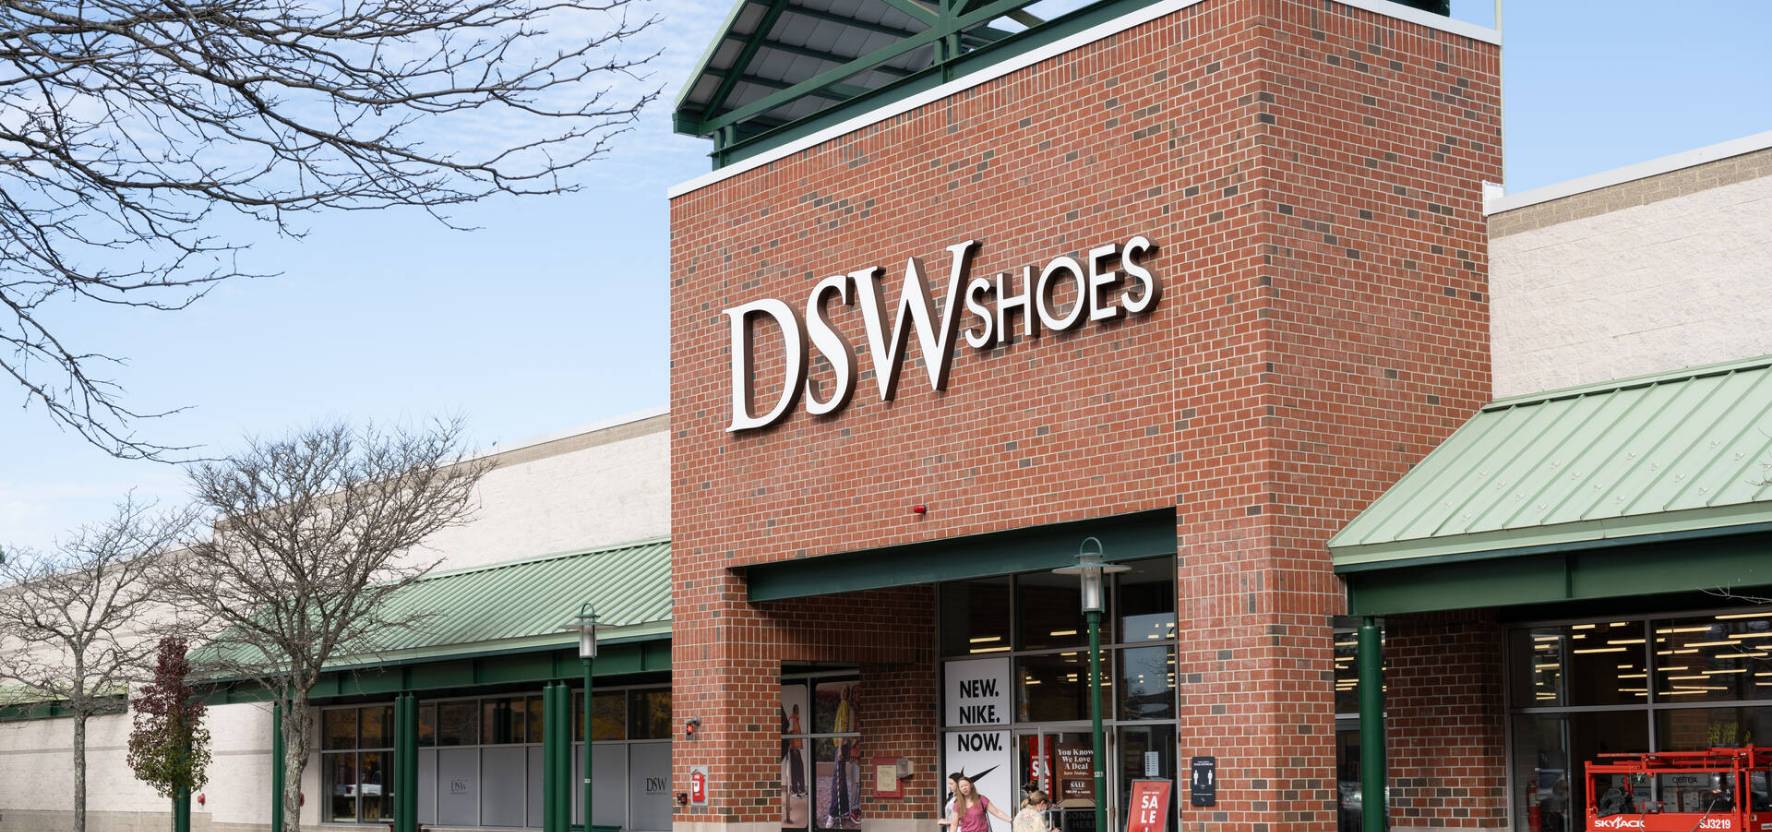 Shoppers World - DSW shoes store photo